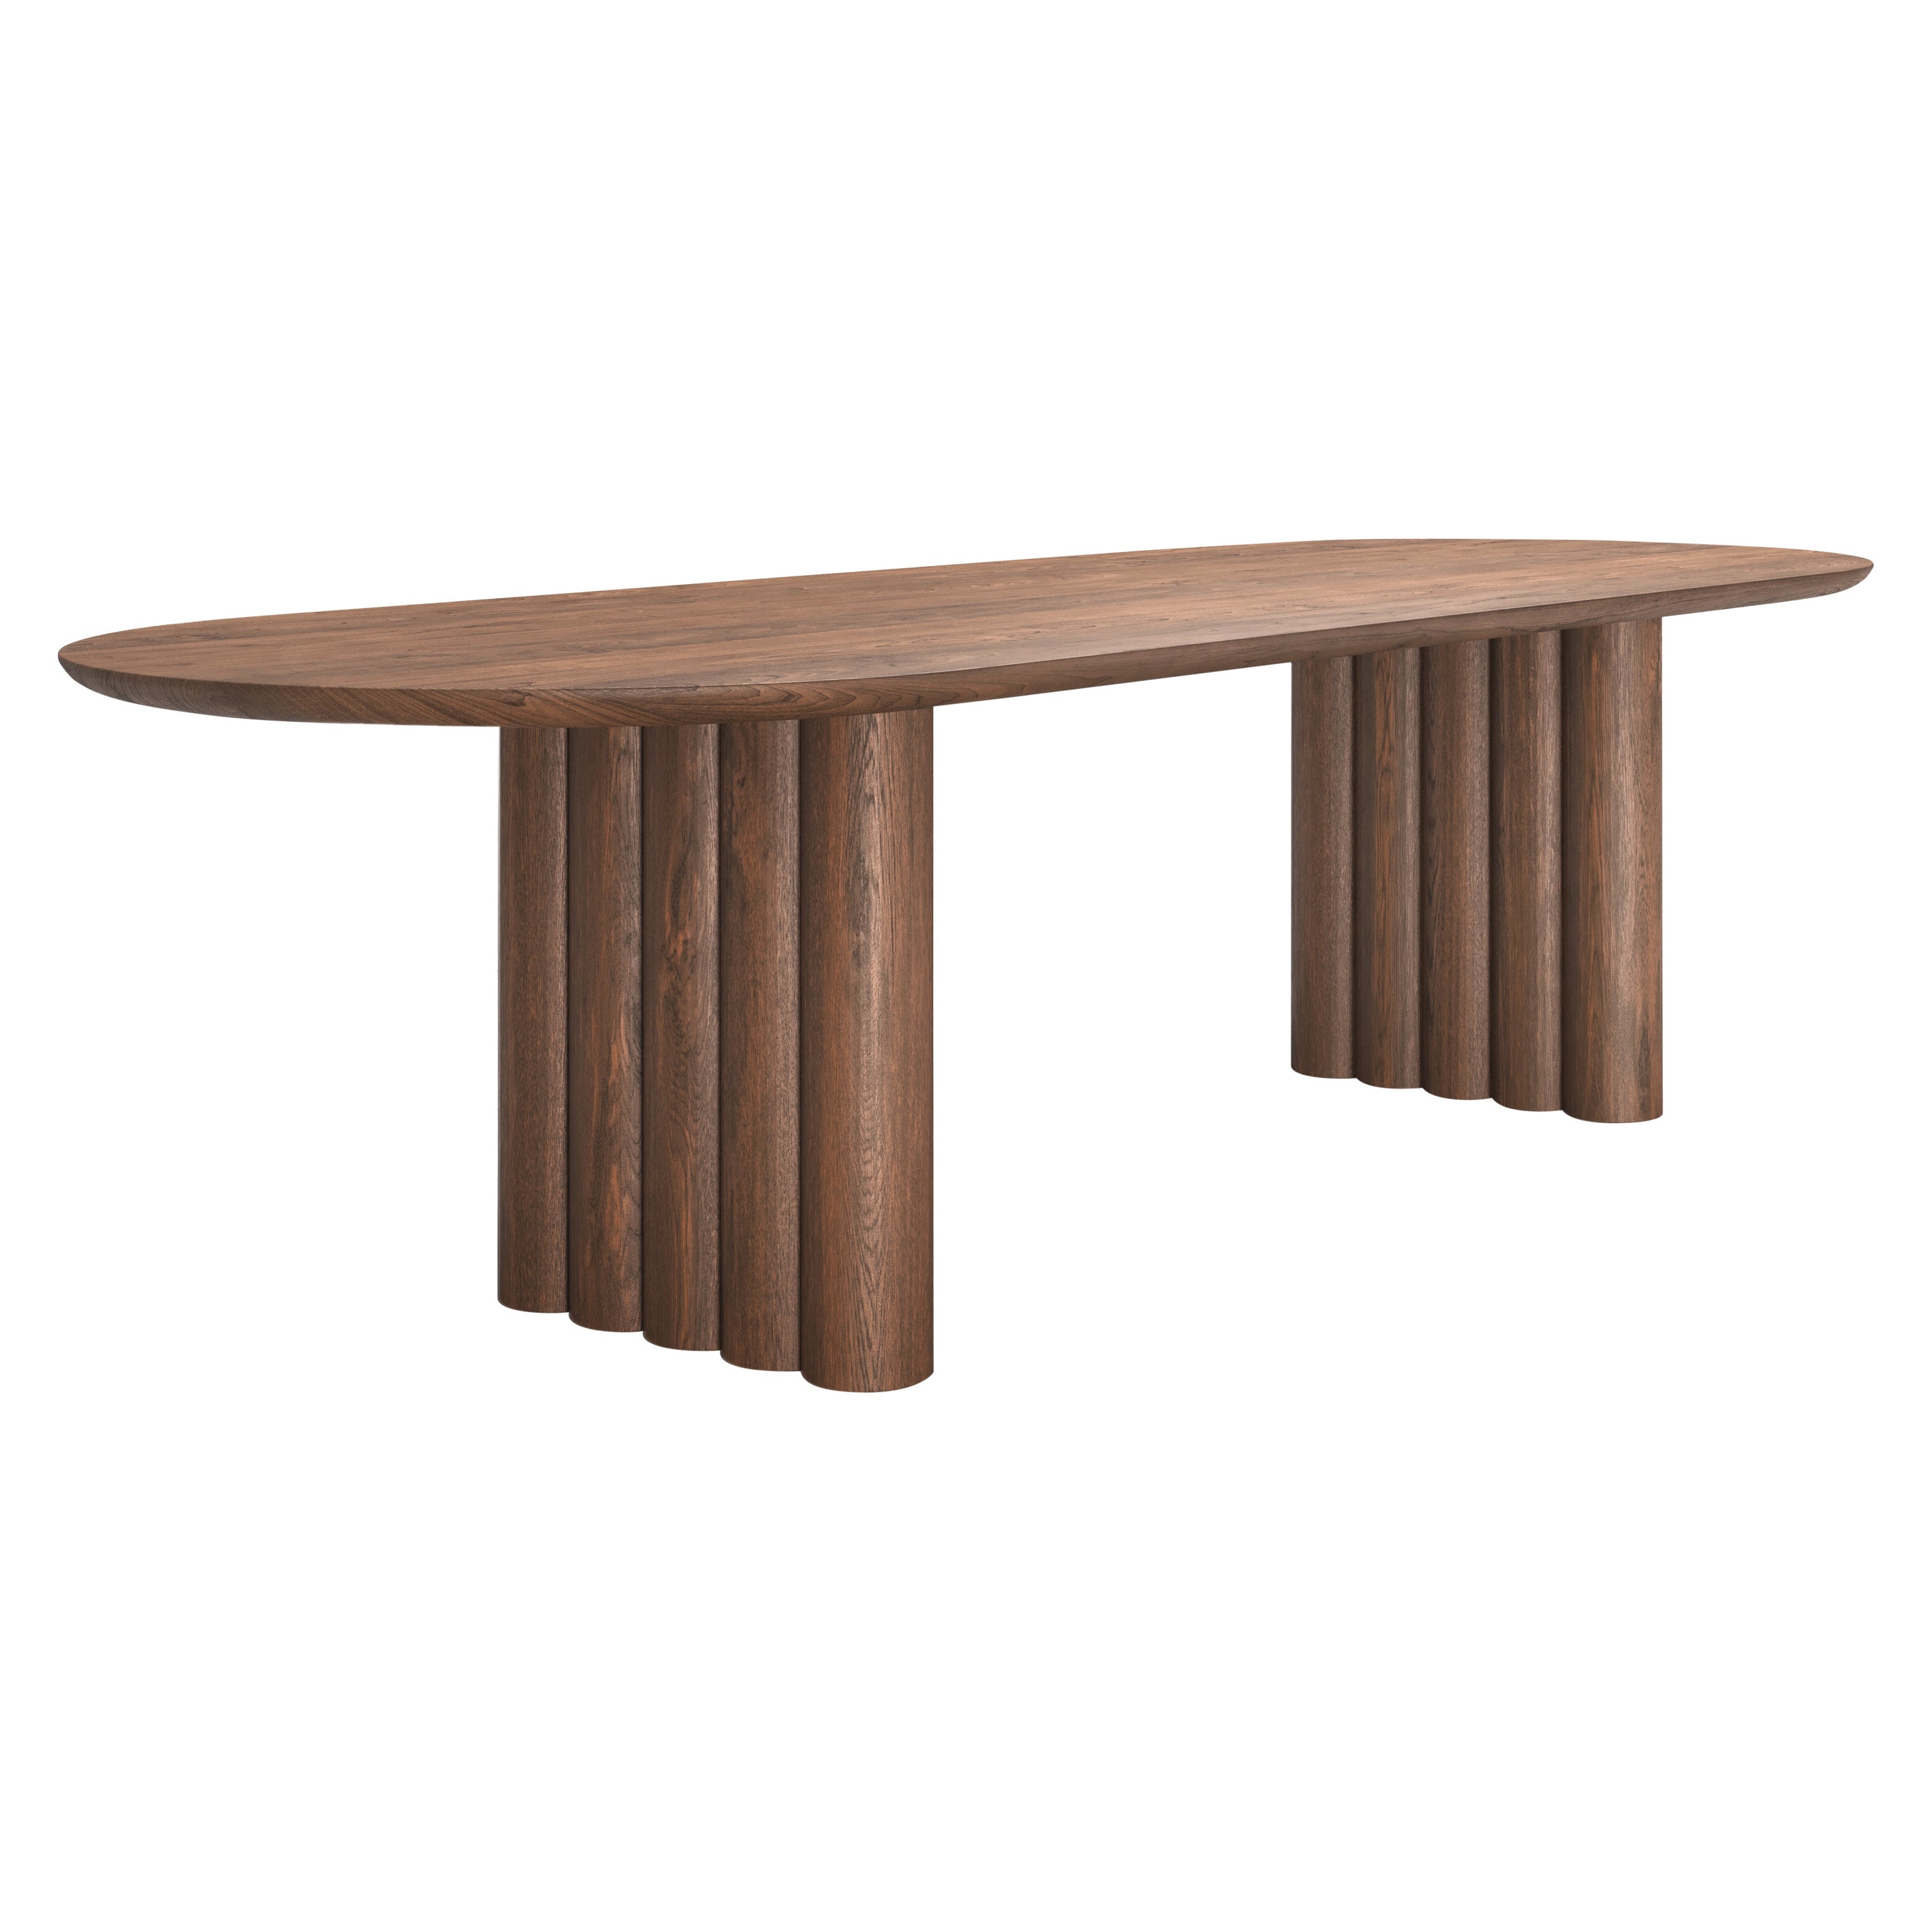 Contemporary Dining Table 'Plush' by Dk3, Smoked Oak or Walnut, 270